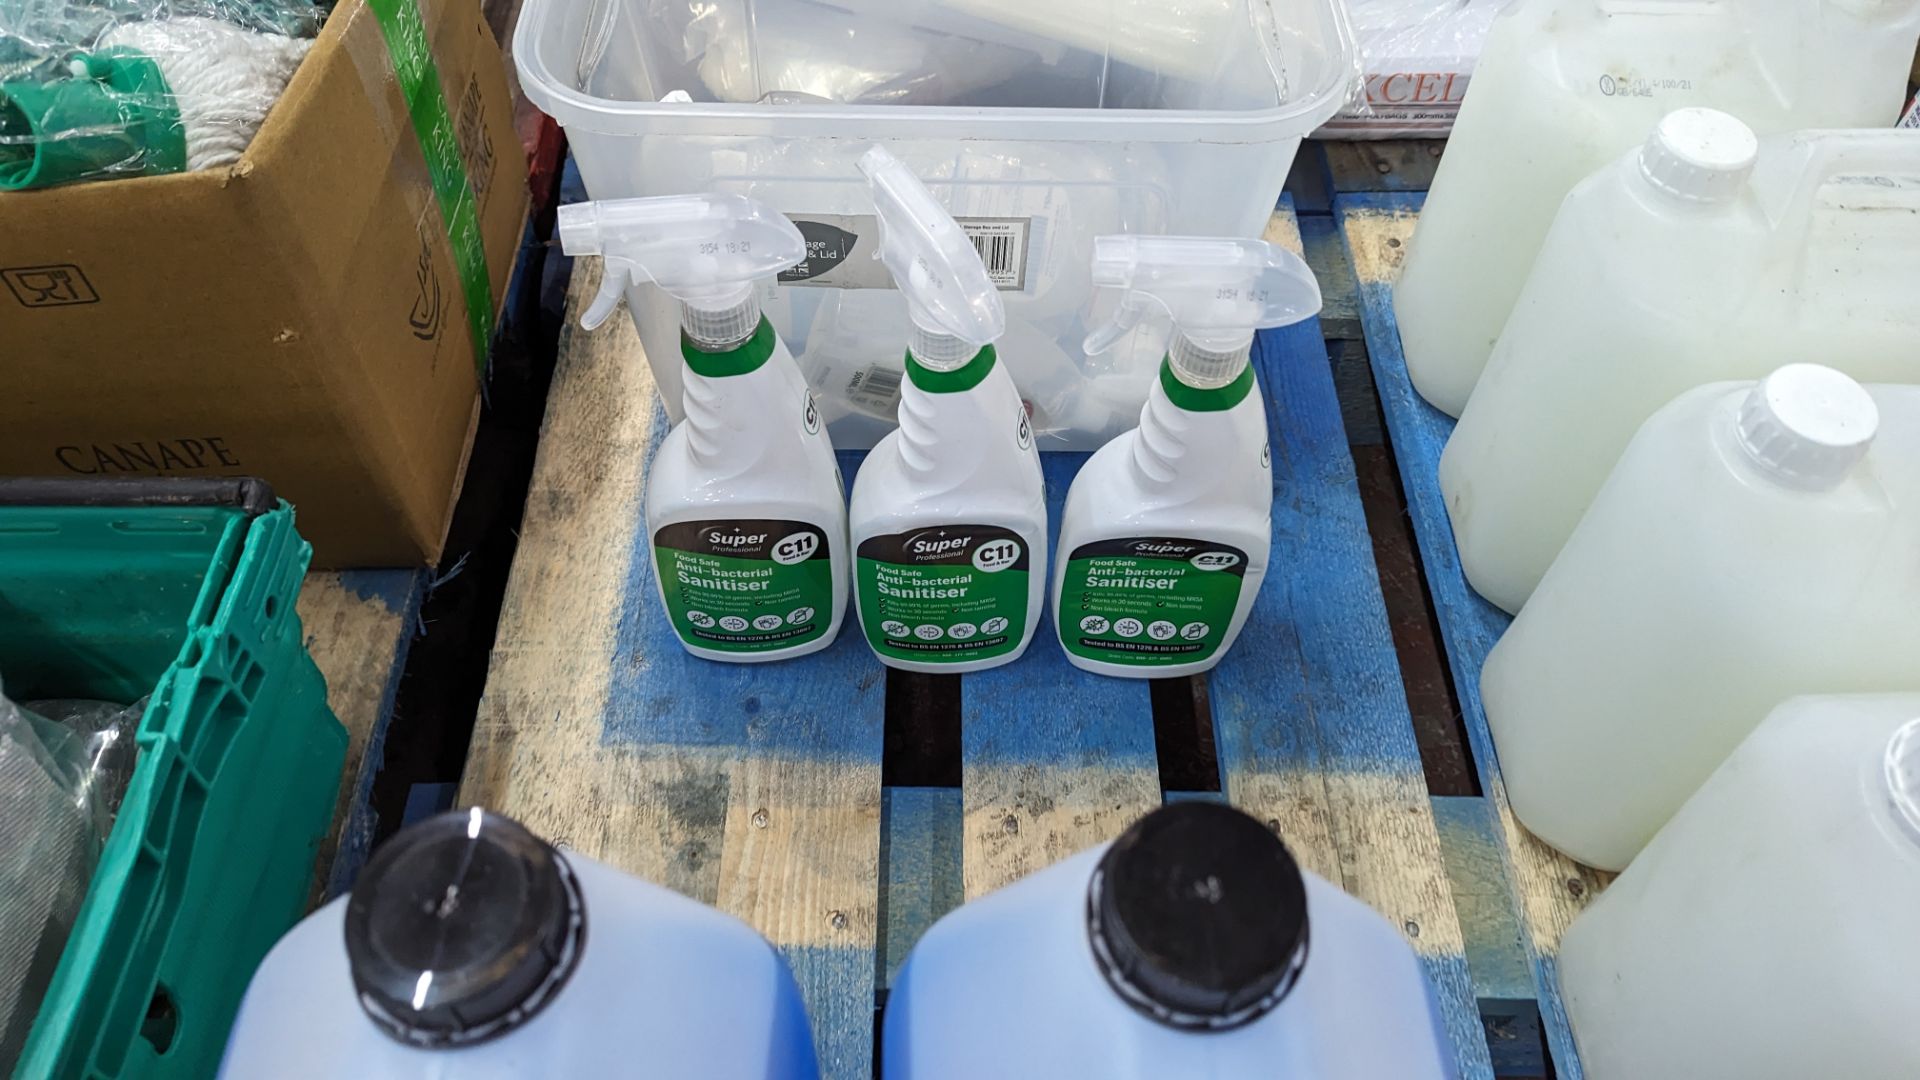 The contents of a pallet of cleaning fluids/solutions - Image 10 of 12